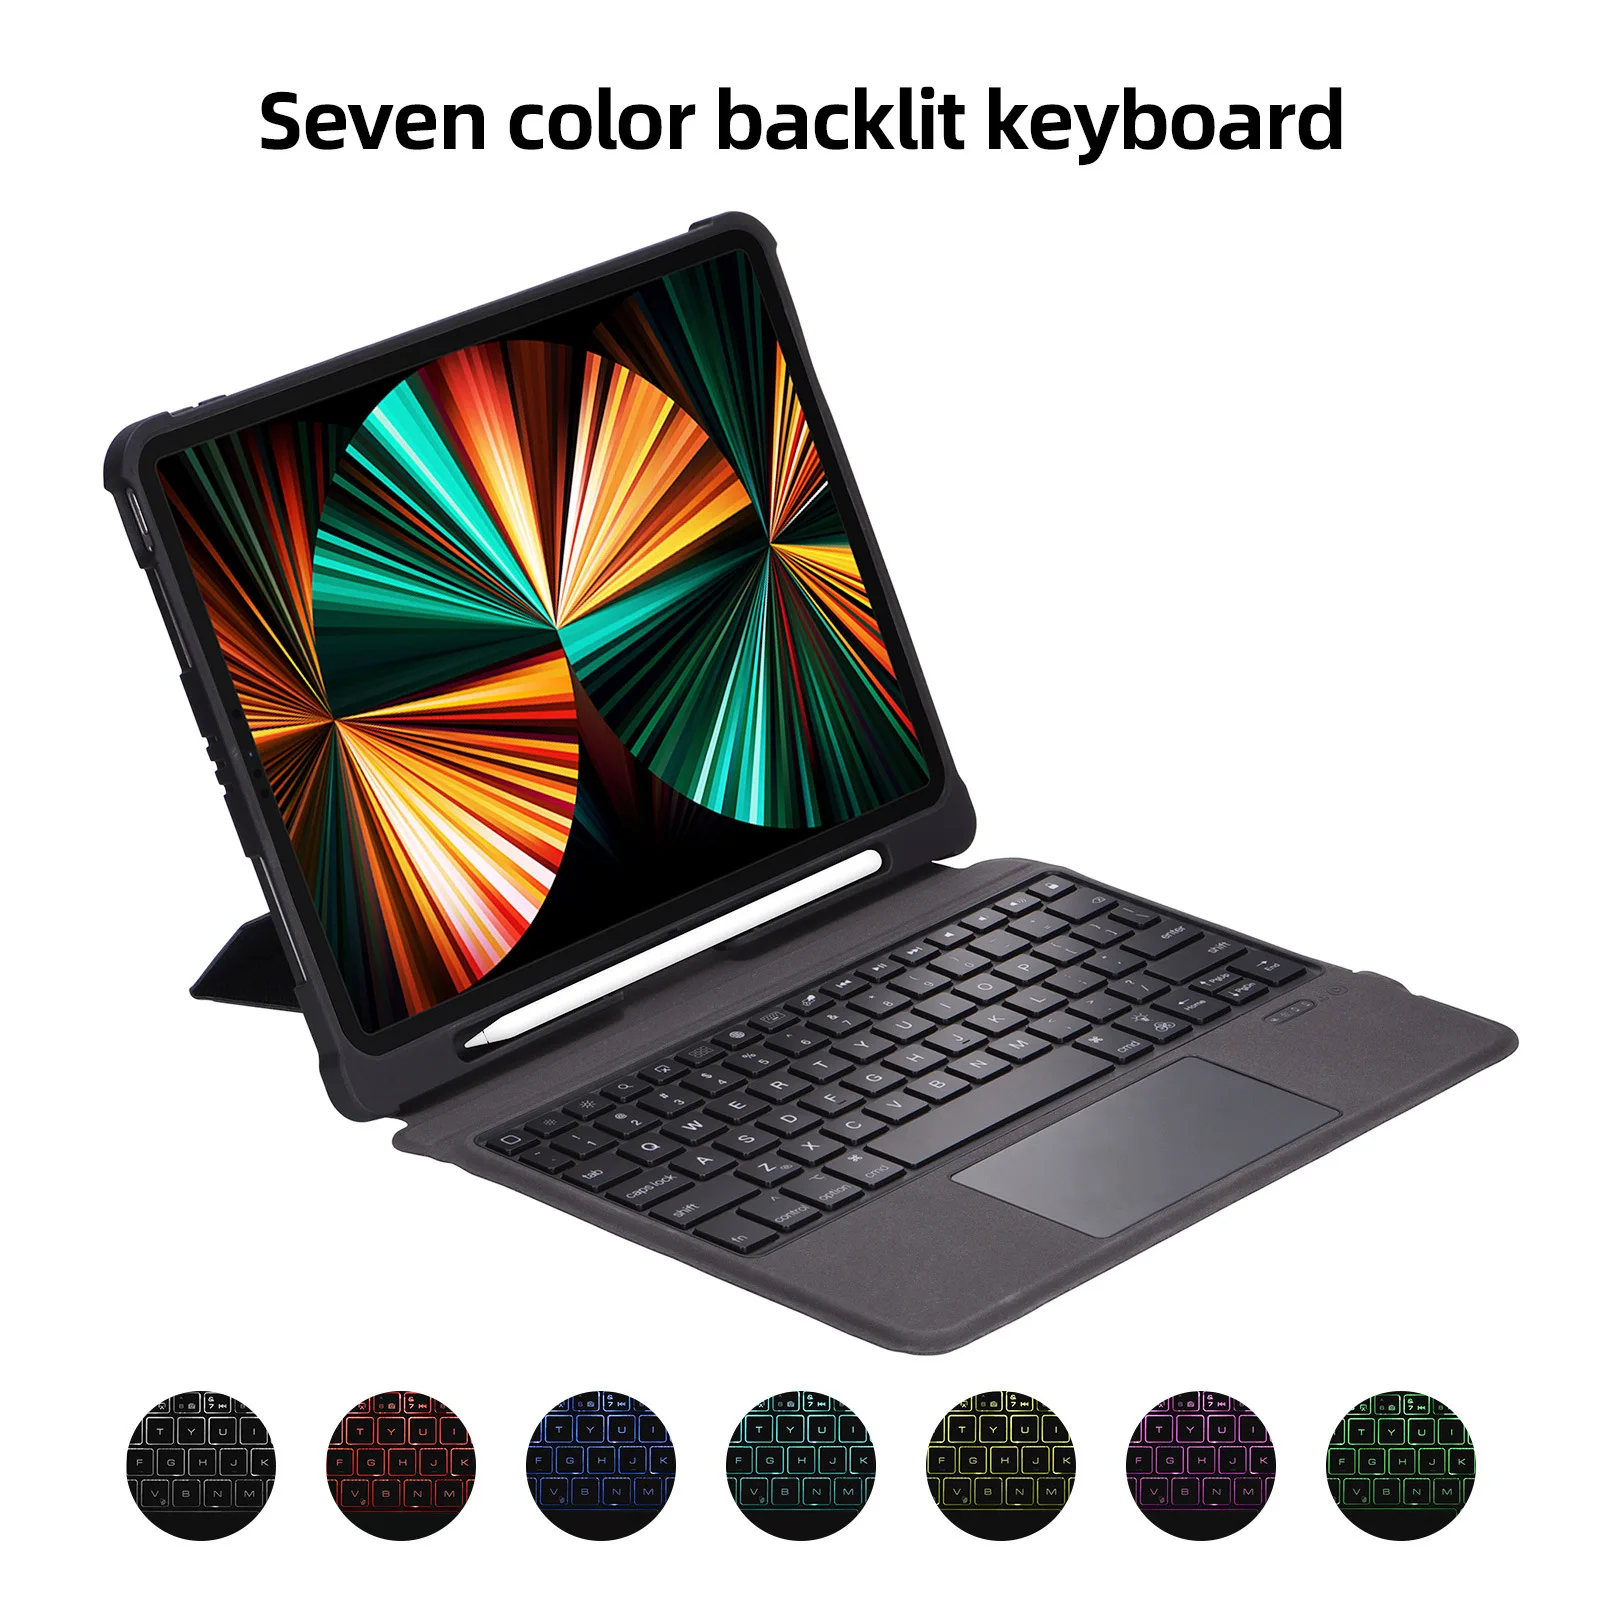 Detachable Keyboard Case For iPad 10.2 10.5 Air 3 4 5 10.9 10th Generation,For iPad Pro 11 12.9 Wireless Keyboard Backlit Cover cb5feb1b7314637725a2e7: English No Backlit|English With Backlit